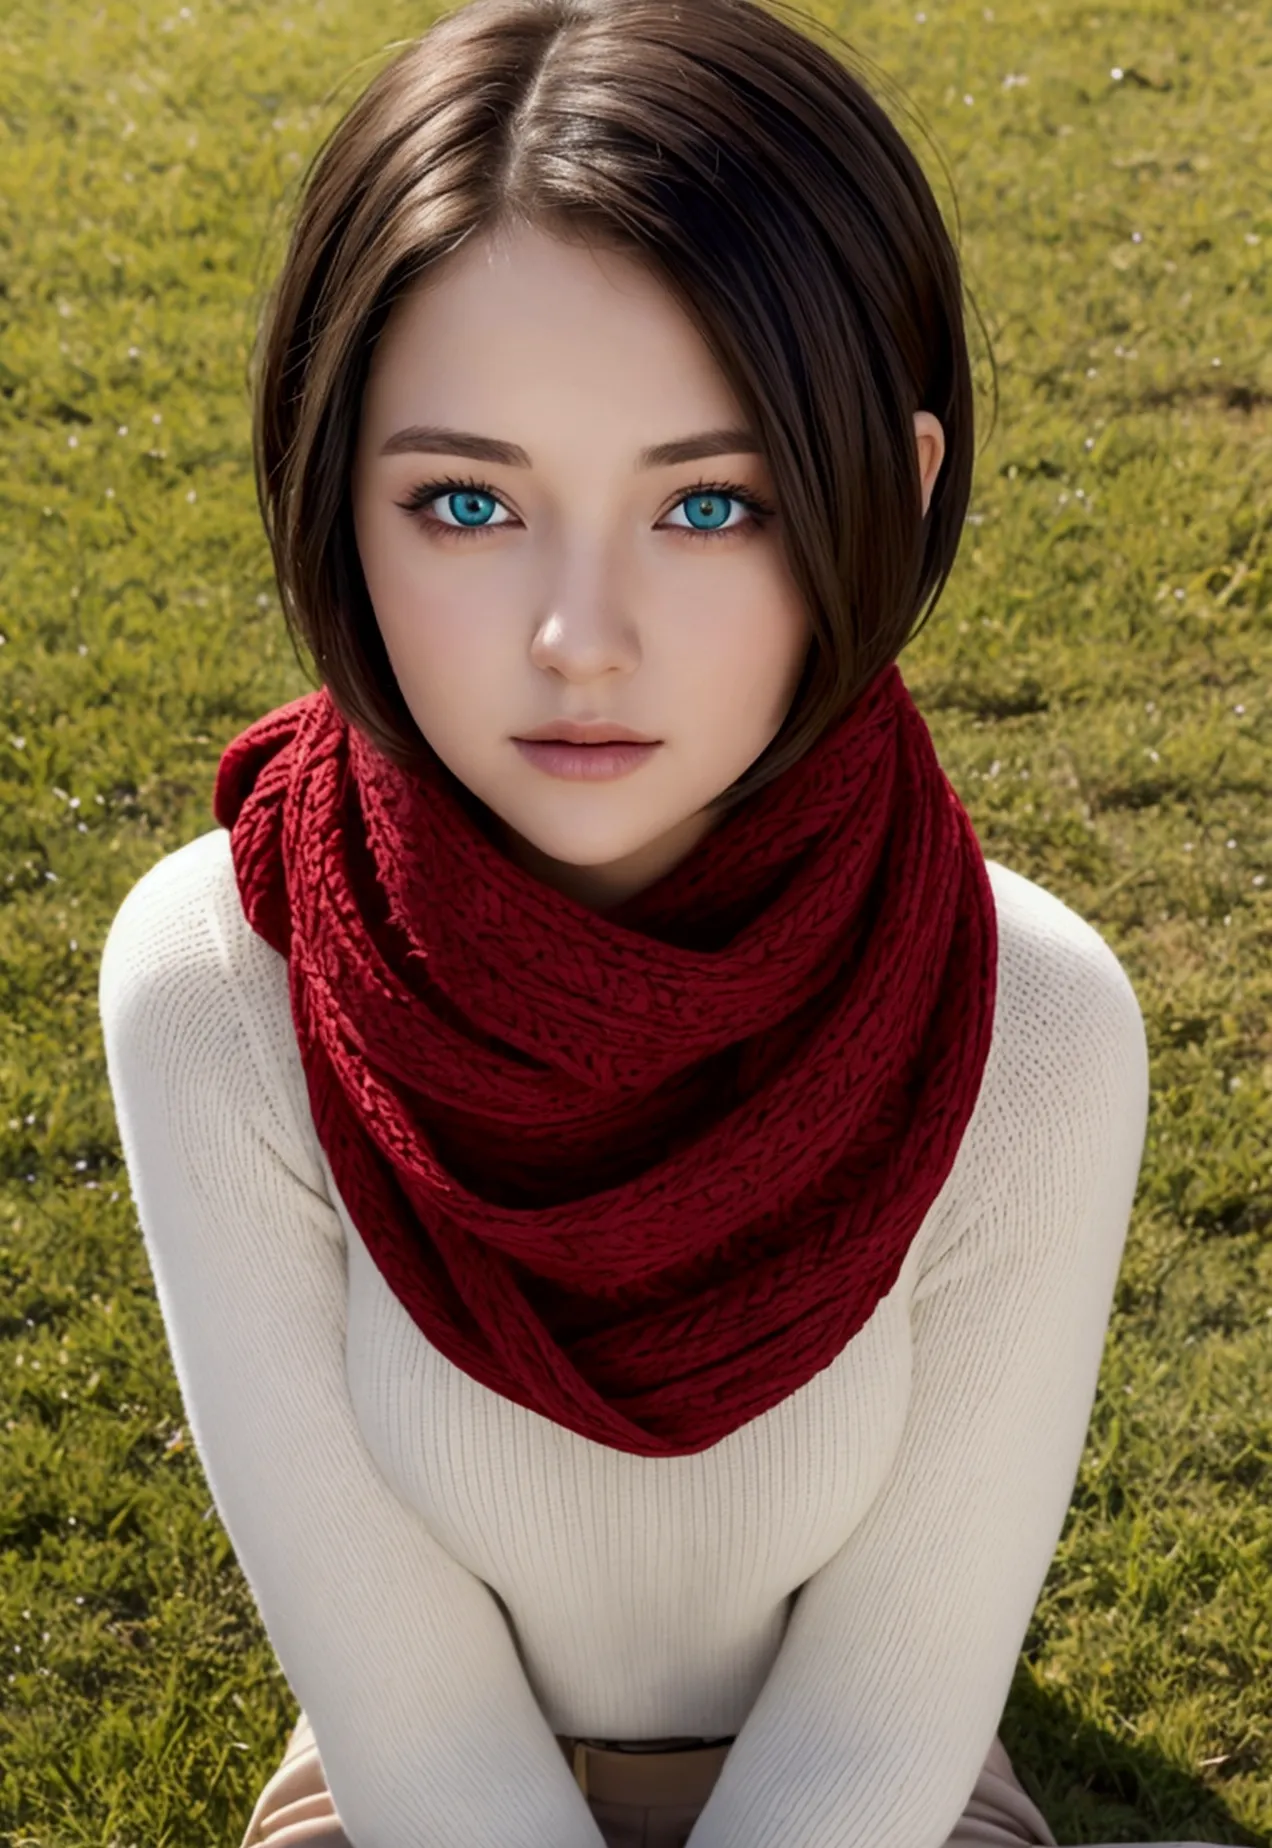 a young woman with short hair wearing a red scarf. slightly blue eyes. angelic face. the background is a ground with green grass...